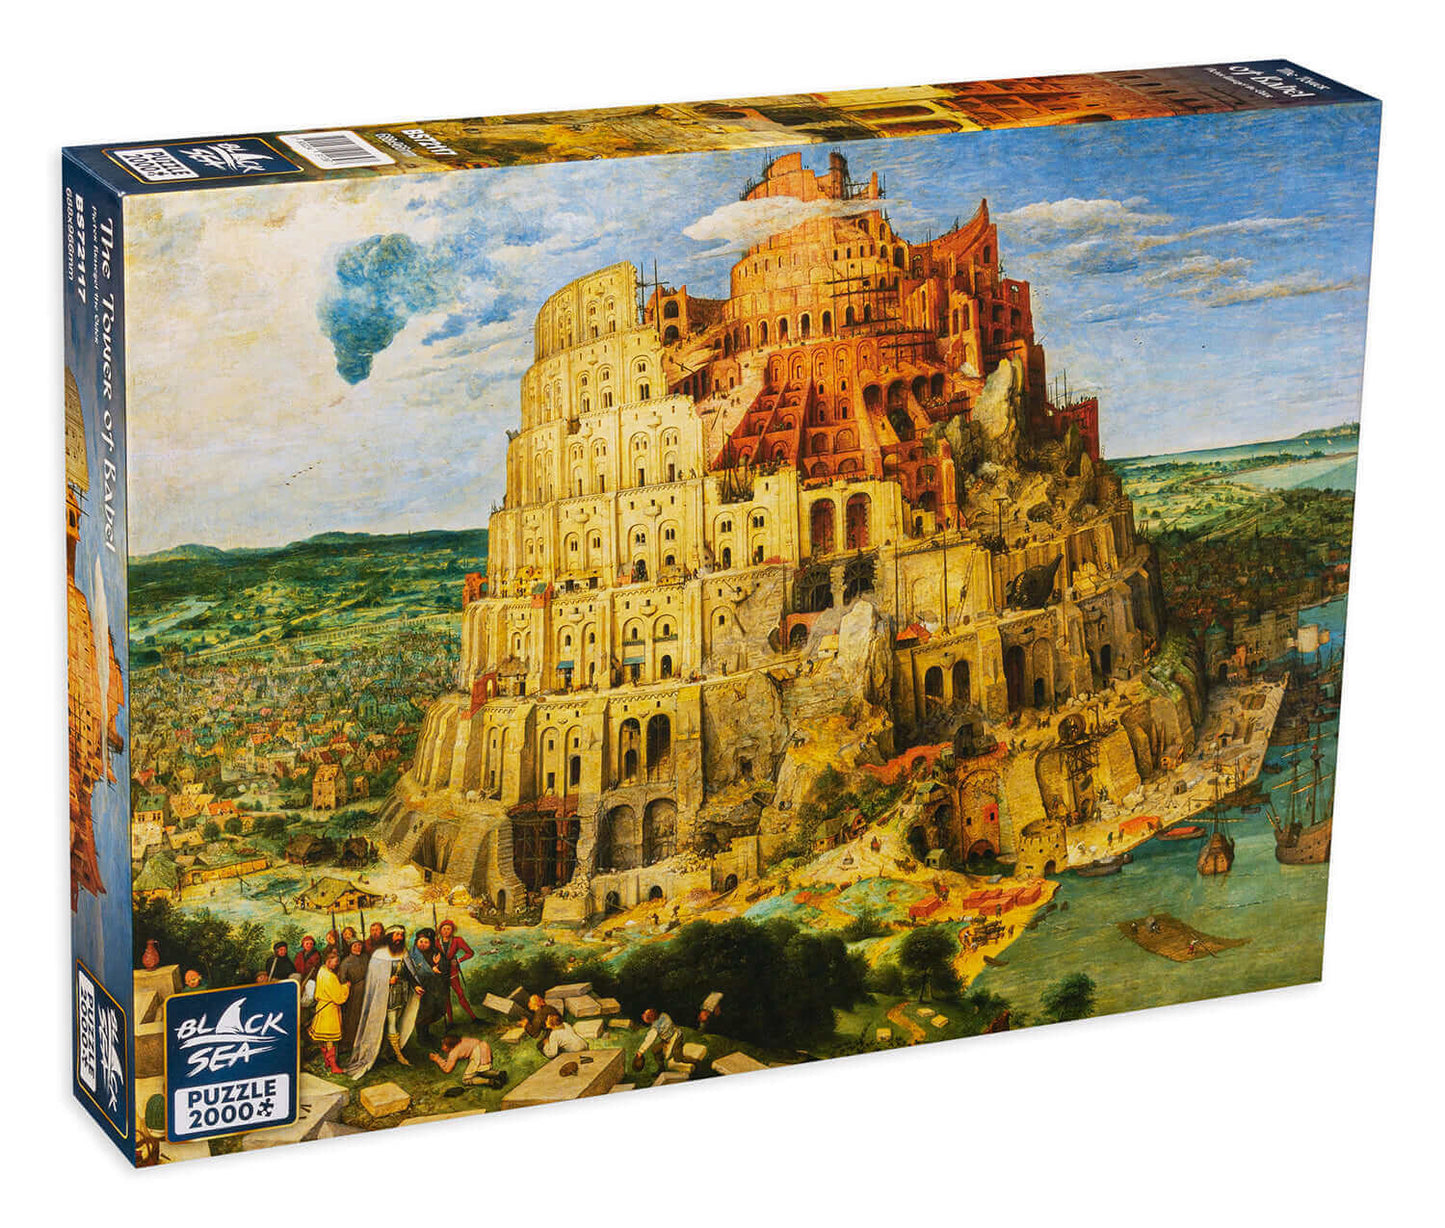 Puzzle Black Sea 2000 pieces - The Tower of Babel, And the people said “Come, let us build ourselves a city, with a tower that reaches to the heavens, so that we may make a name for ourselves”. And the great construction began. The Lord came down to see t